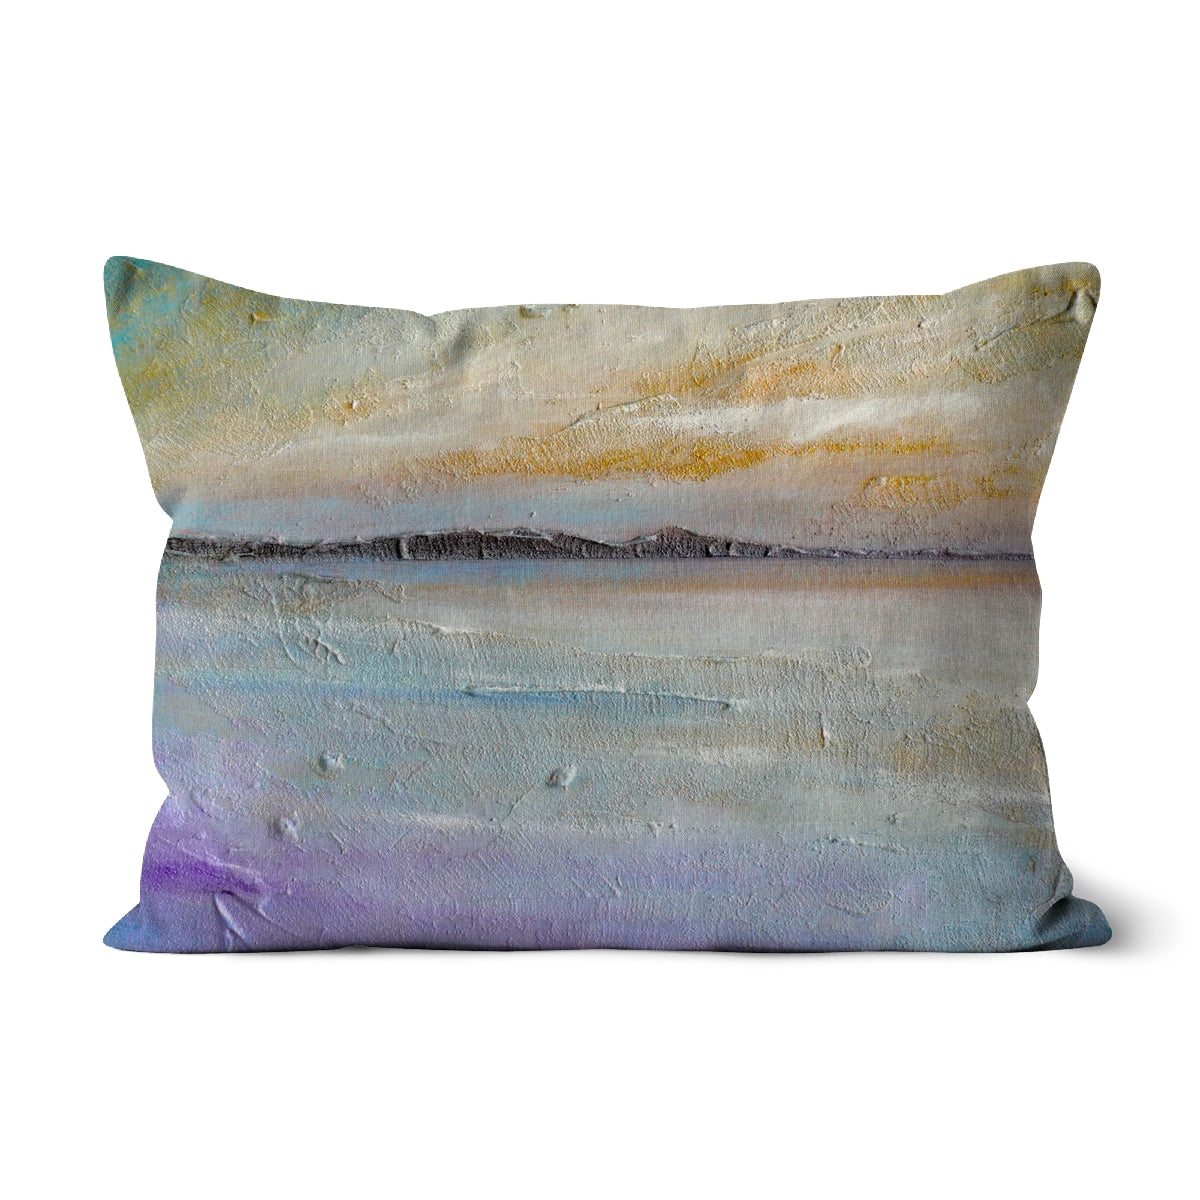 Sollas Beach South Uist Art Gifts Cushion-Cushions-Hebridean Islands Art Gallery-Faux Suede-19"x13"-Paintings, Prints, Homeware, Art Gifts From Scotland By Scottish Artist Kevin Hunter